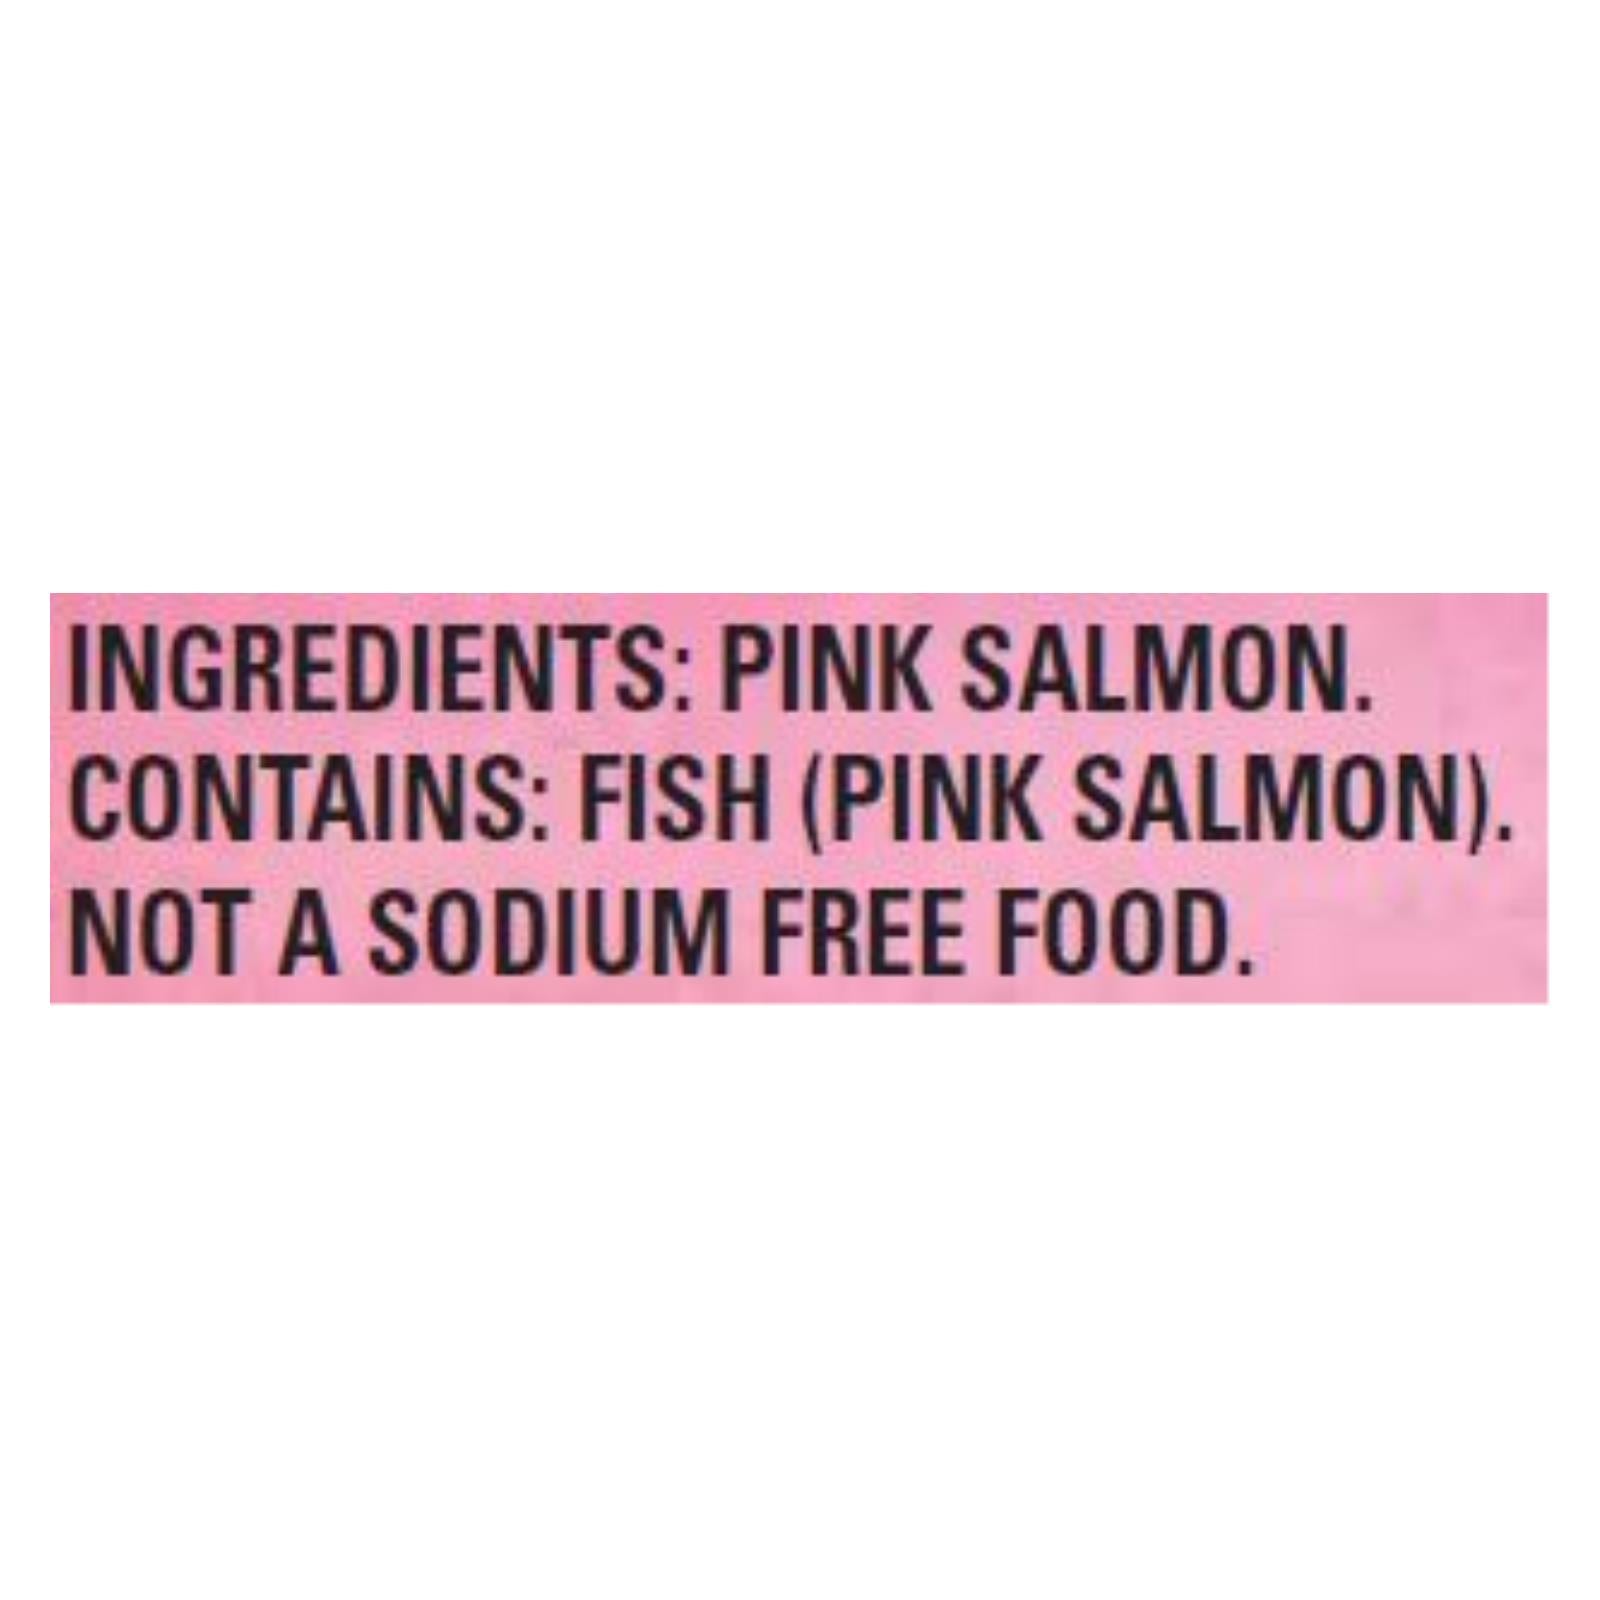 Natural Sea Wild Pink Salmon, Unsalted - Case of 12 - 7.5 OZ